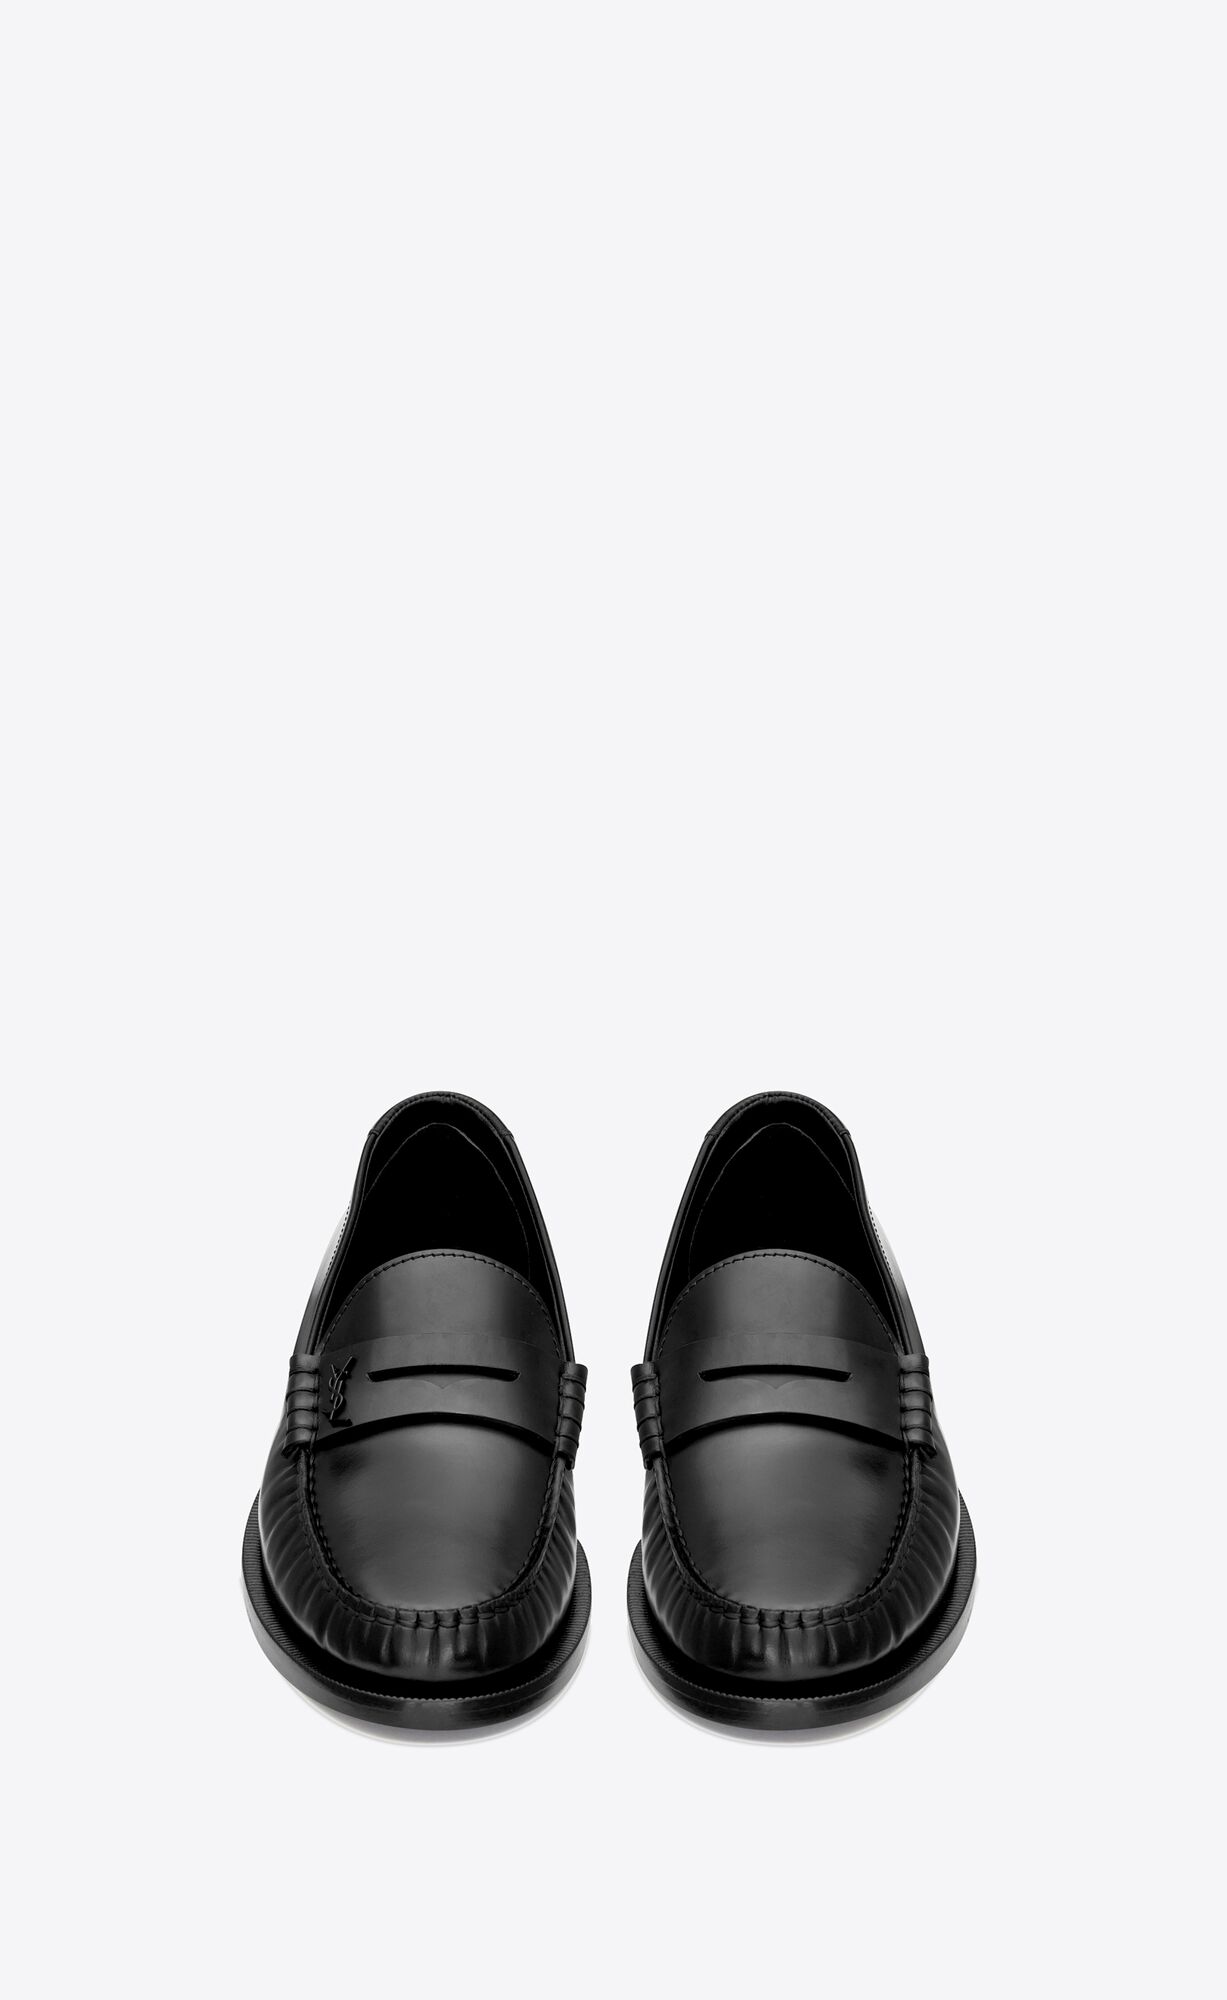 LE LOAFER penny slippers IN SMOOTH LEATHER | Saint Laurent | YSL.com